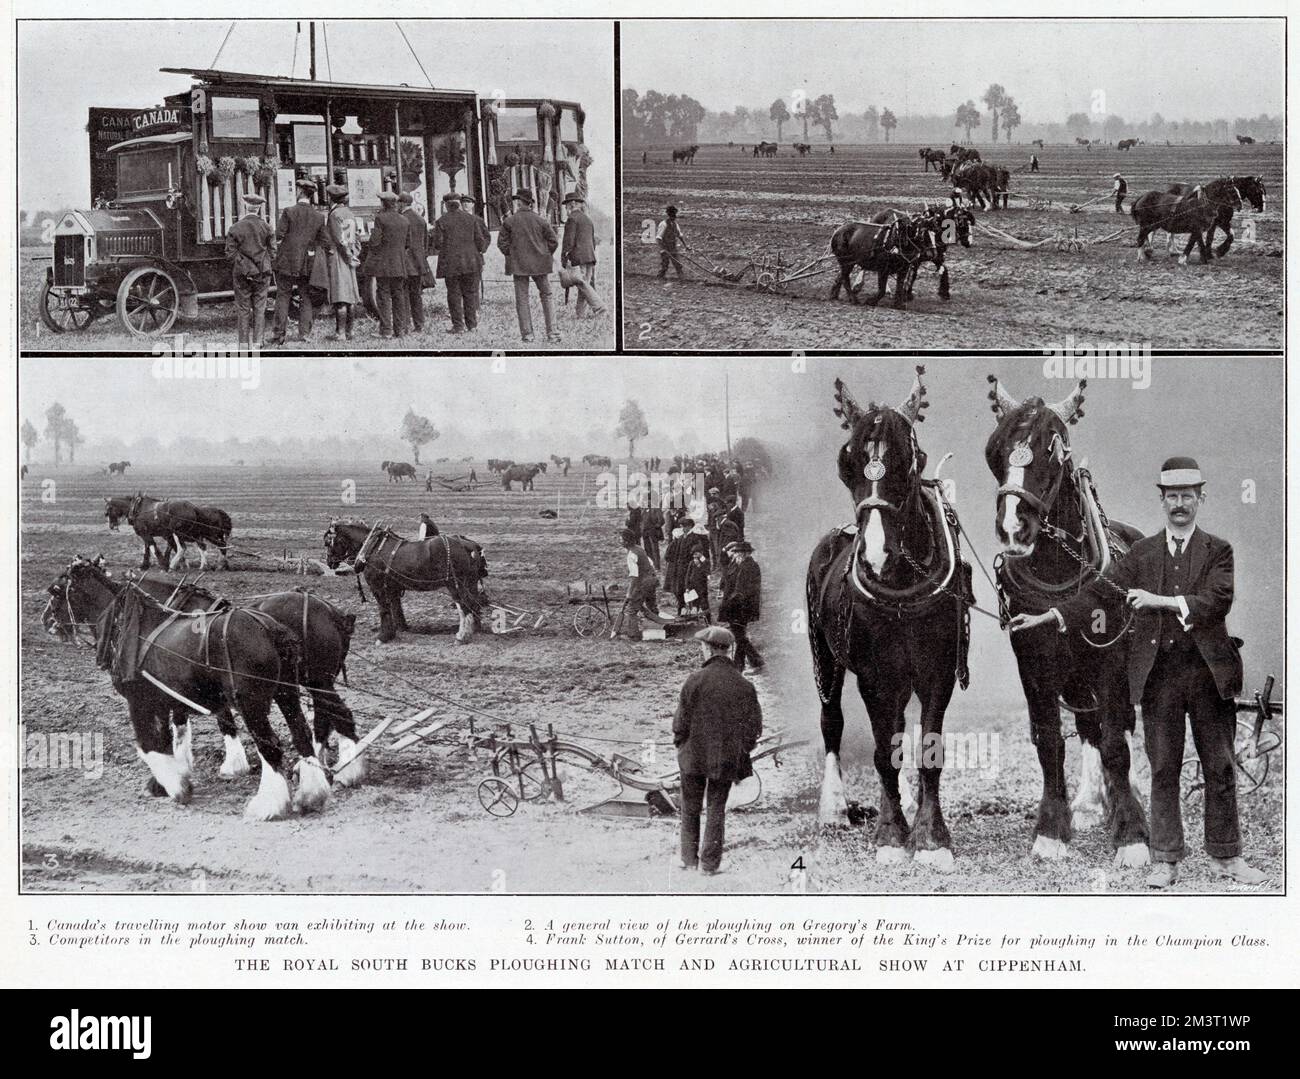 The Royal South Bucks ploughing match and agricultural show at Cippenham, 1913. 1. Canada's travelling motor show van exhibiting; 2. General view of the ploughing on Gregory's Farm; 3. Competitors in the ploughing match; 4. Frank Sutton, of Gerrard's Cross, winner of the King's Prize for ploughing in the Champion Class. Stock Photo